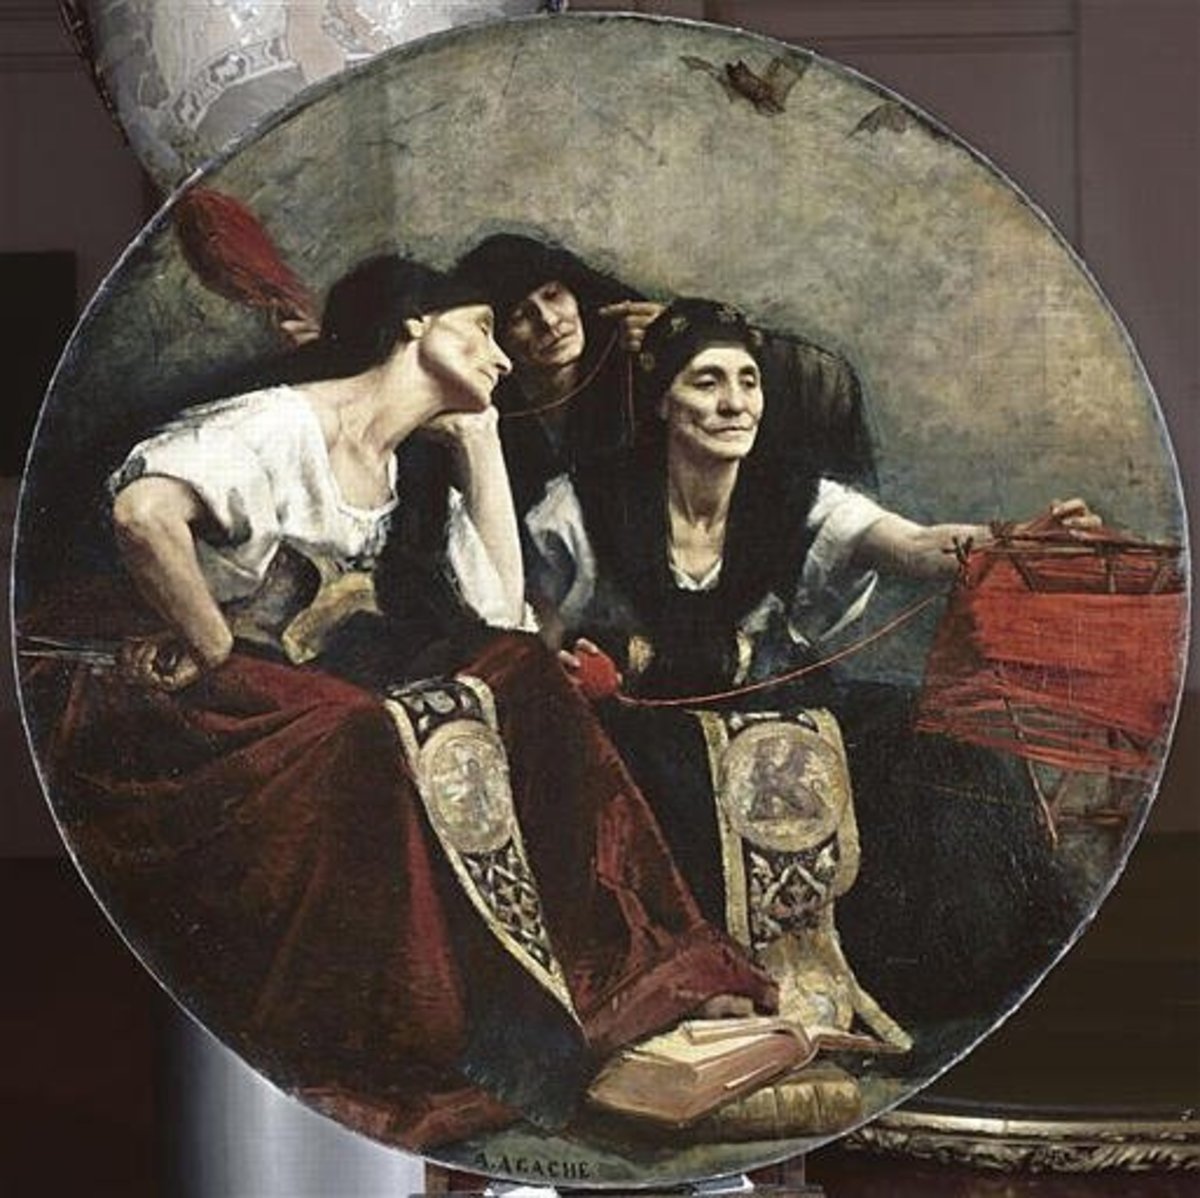 The Fates by Alfred Agache, c 1885